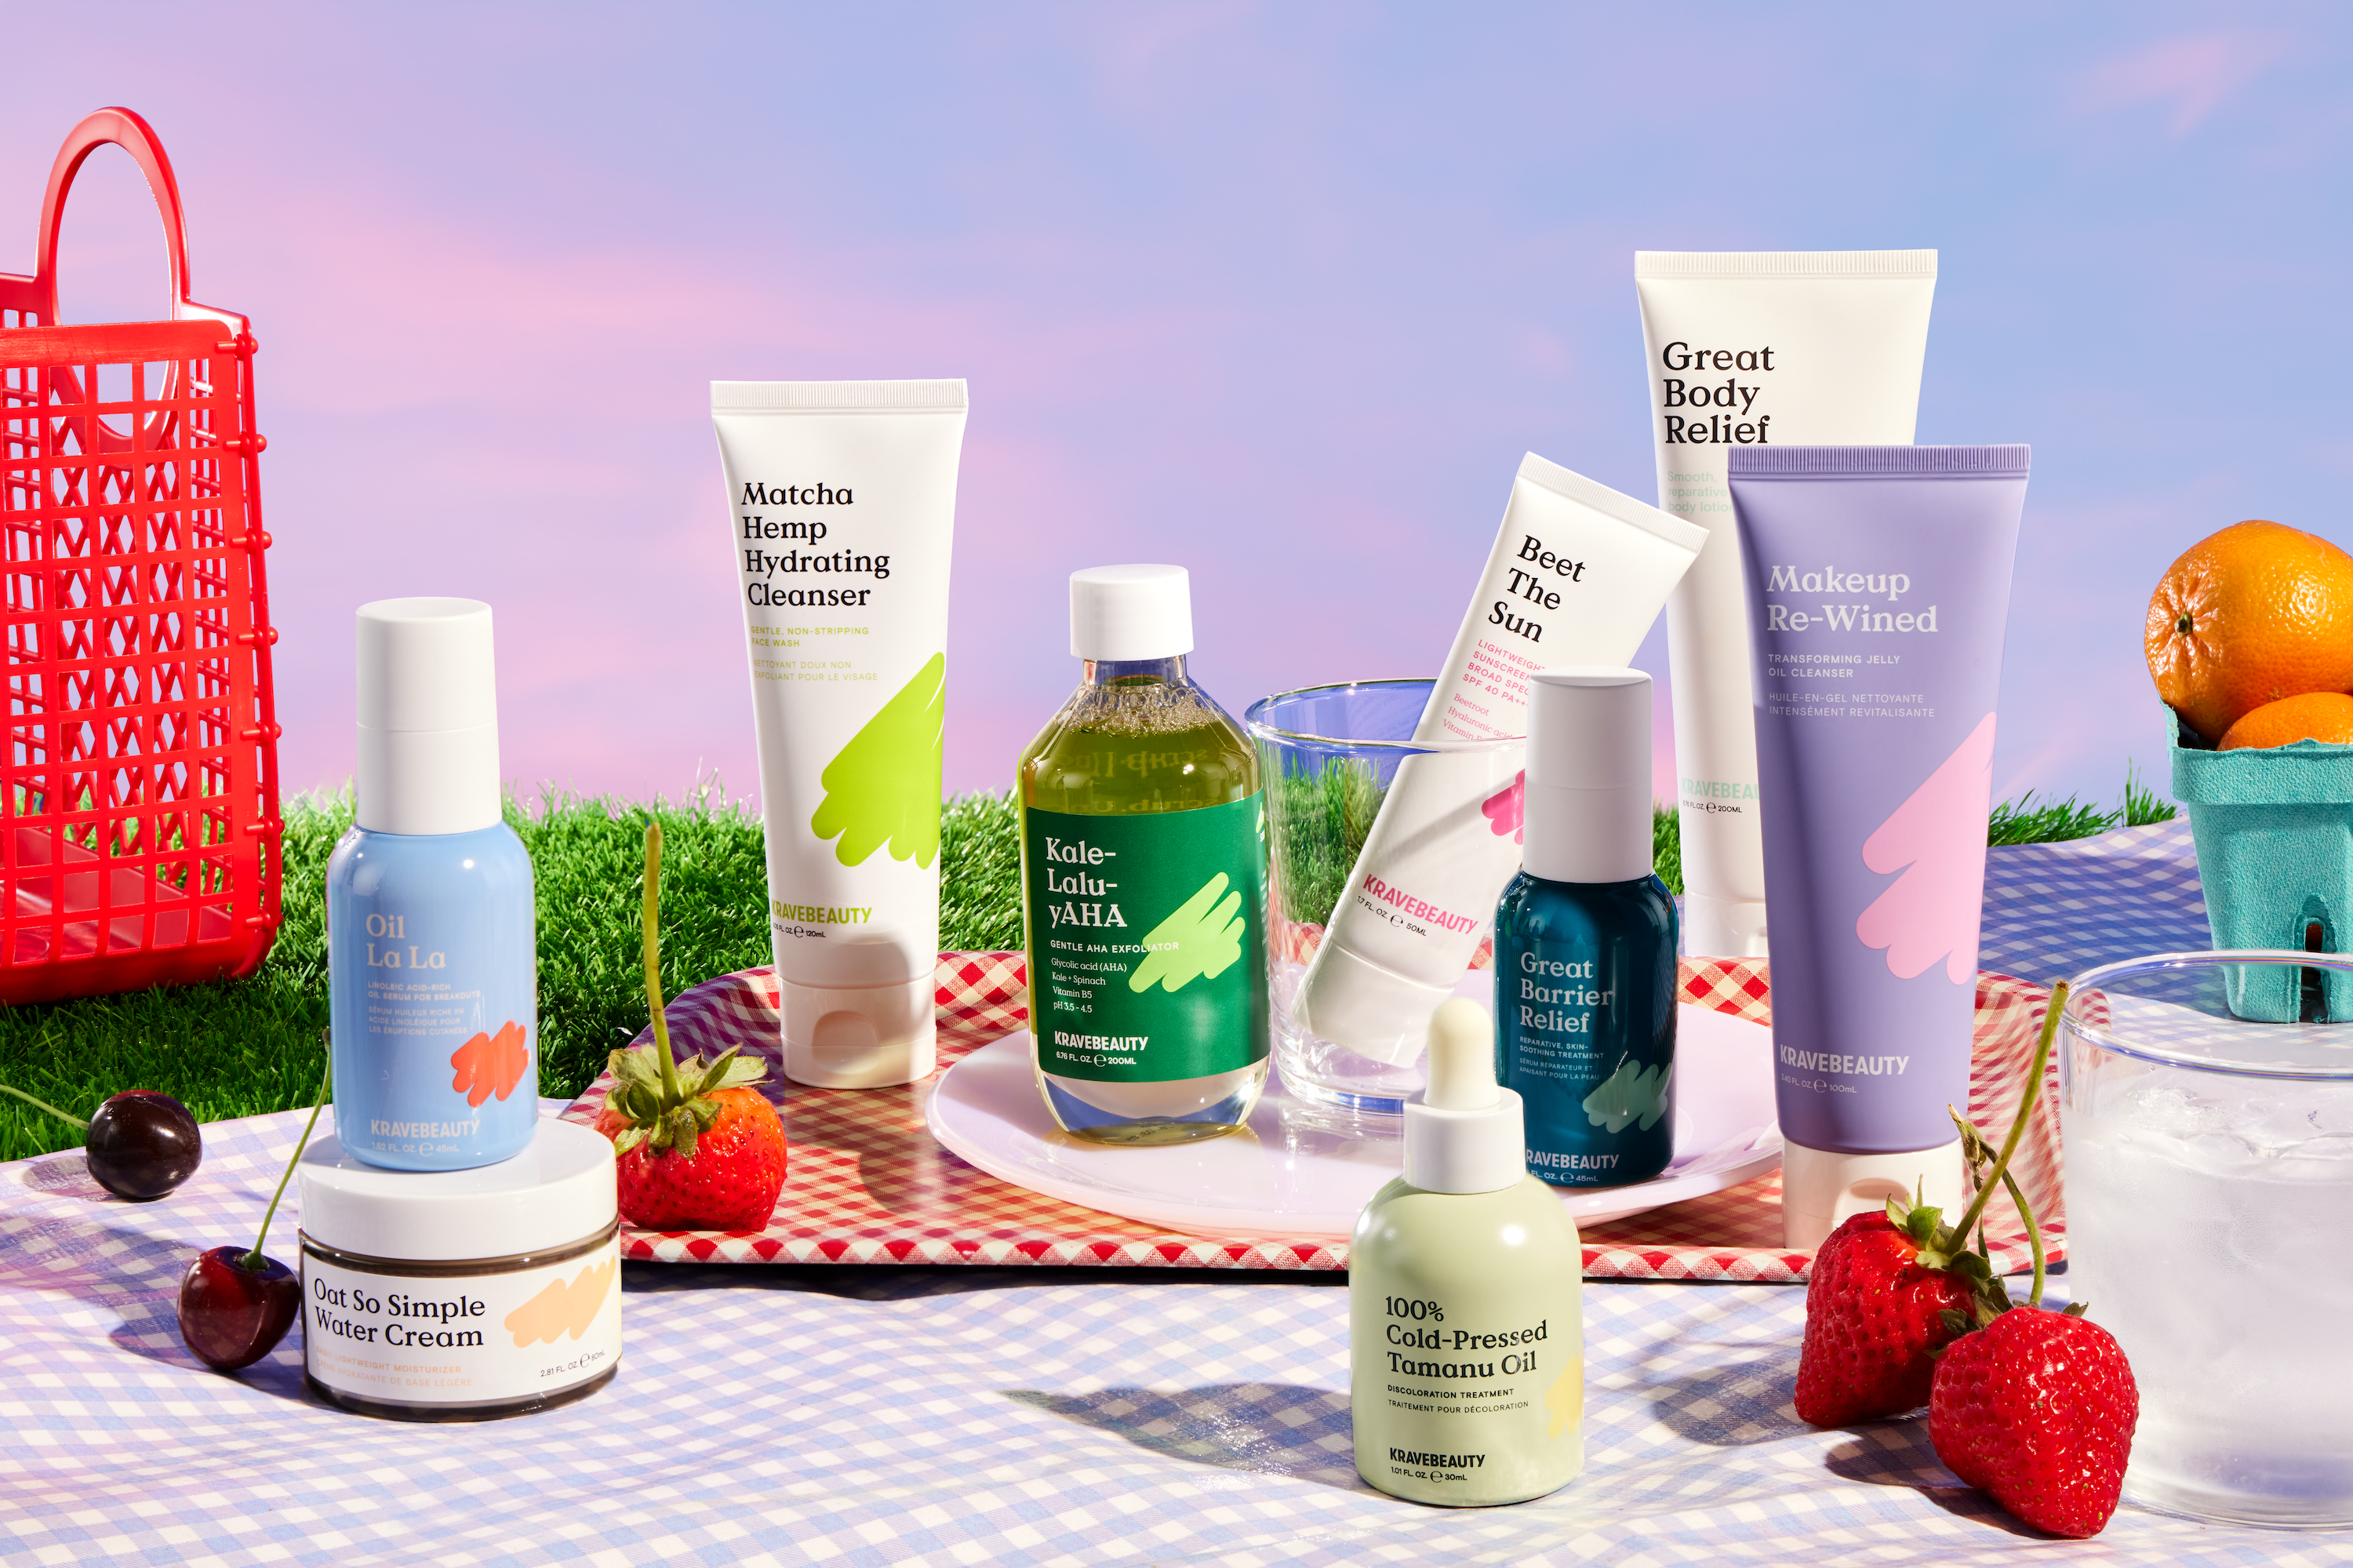 a picnic displaying all nine of the kravebeauty products. In order from left to right: oil la la, oat so simple water cream, matcha hemp hydrating cleanser, kale-lalu-yAHA, beet the sun, 100% cold-pressed tamanu oil, great barrier relief, great body relief, and makeup re-wined.